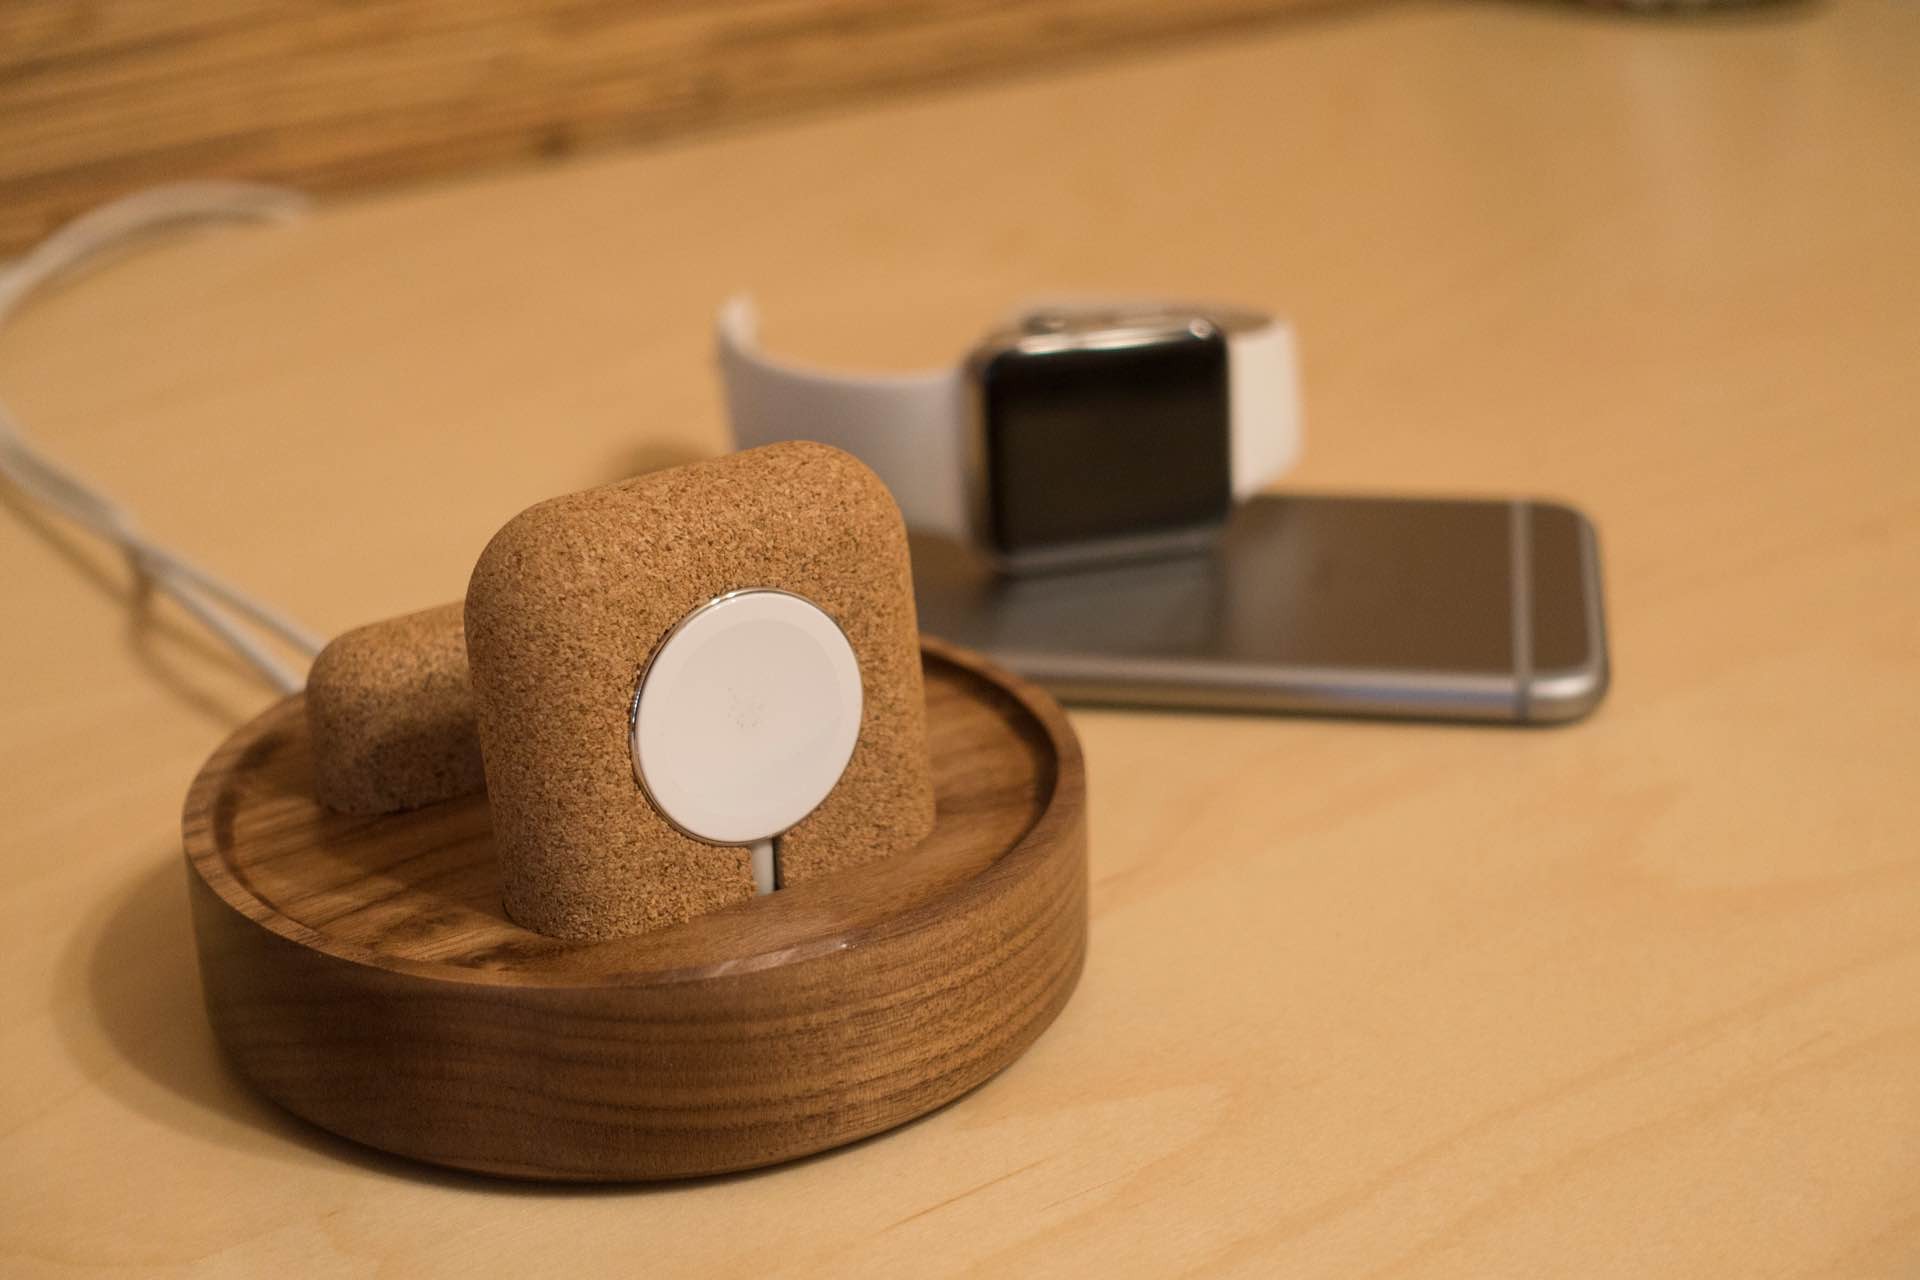 Studio Neat's Material Dock for iPhone and Apple Watch. ($45 or $70, depending on model)